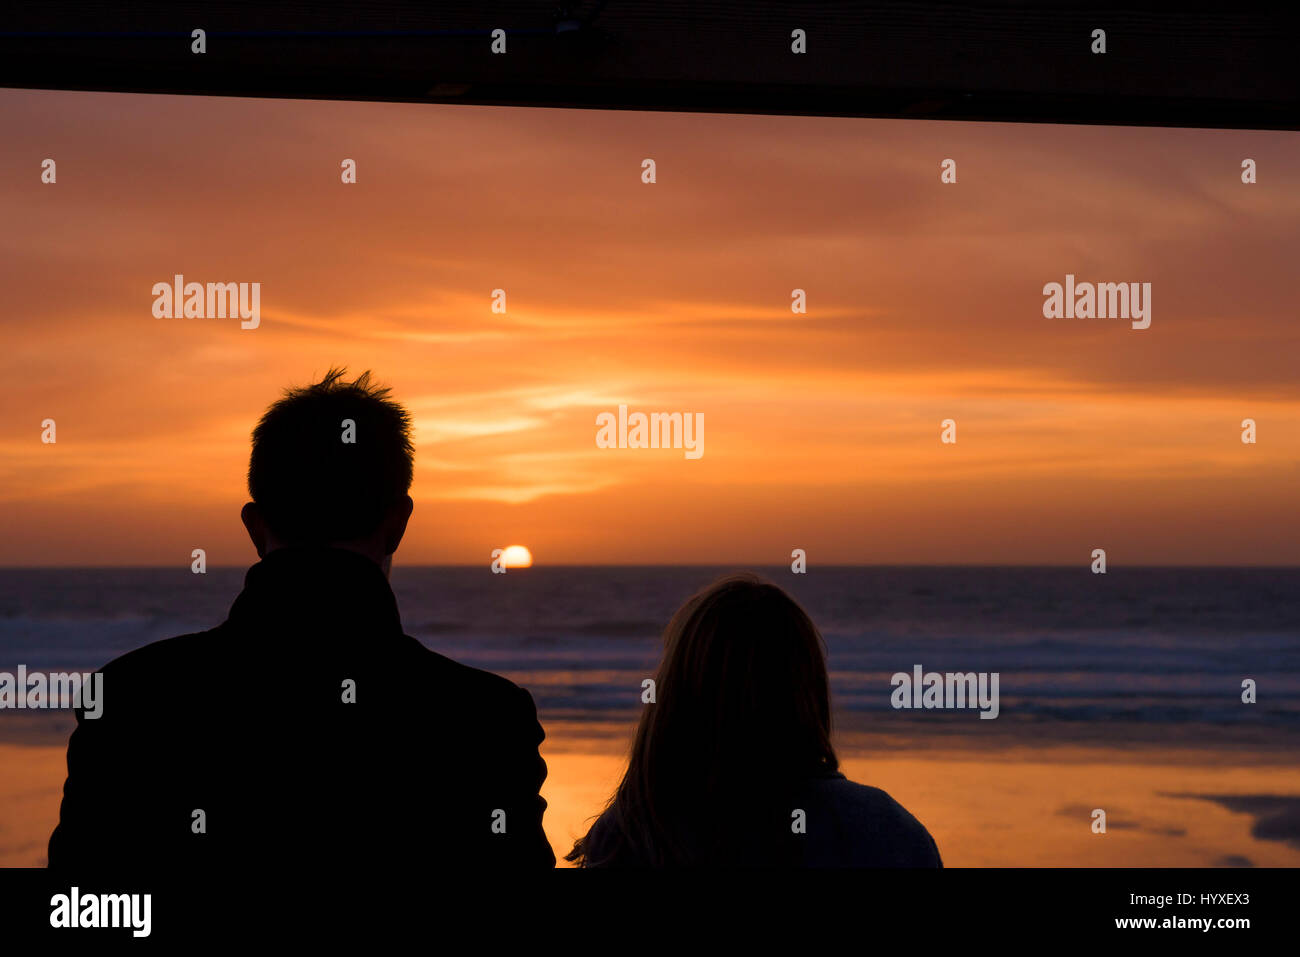 Sunset People Silhouette Couple Seaside Setting sun Coast Fistral Beach Evening End of the day Dusk Sea Ocean Leisure time Tourism Stock Photo